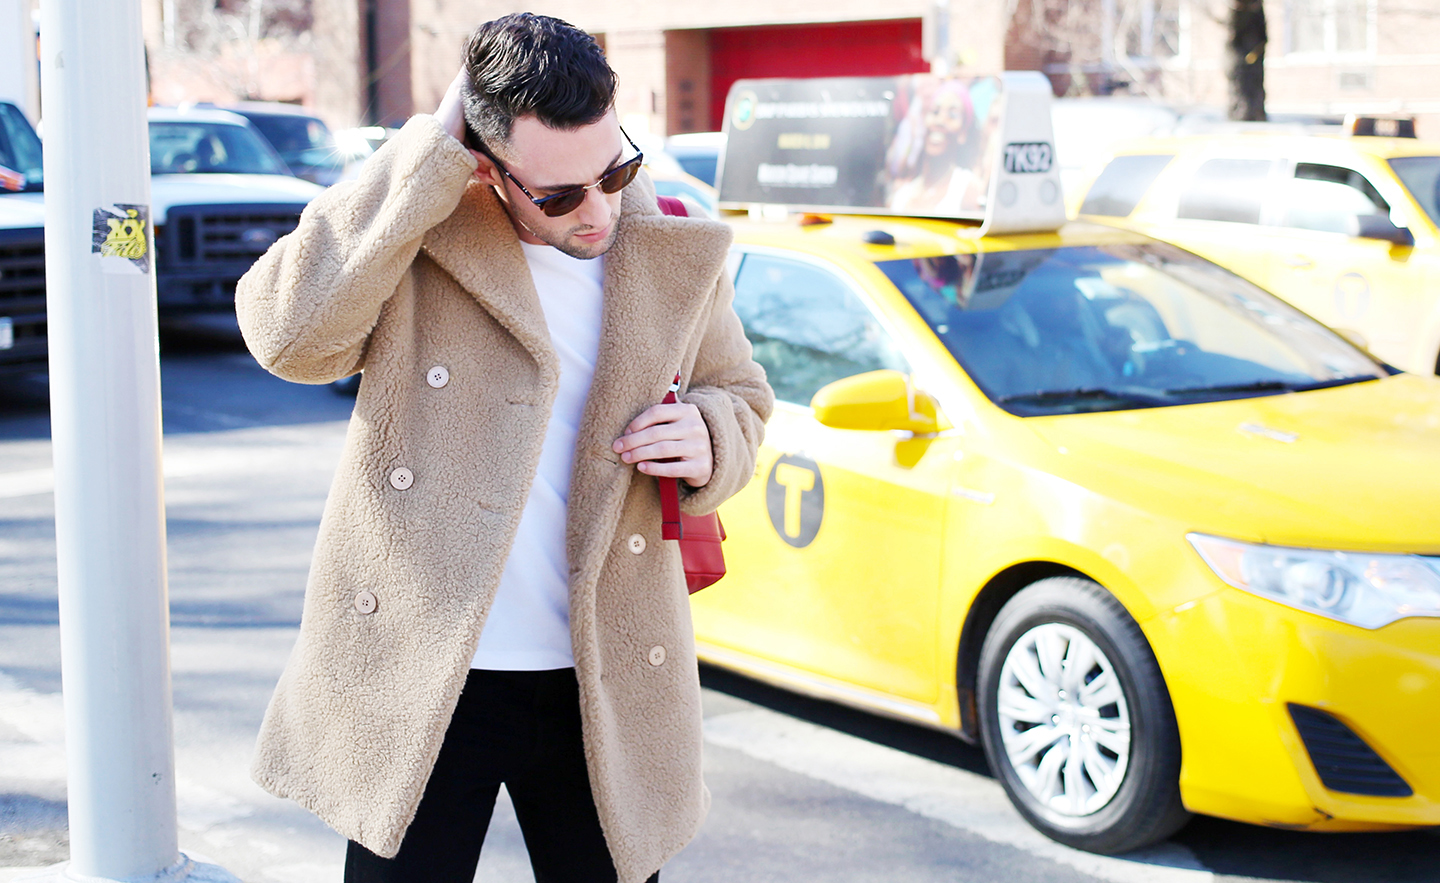 WE’VE BEEN RUNNING AROUND NEW YORK MENS FASHION WEEK LIKE TWO MAD MEN